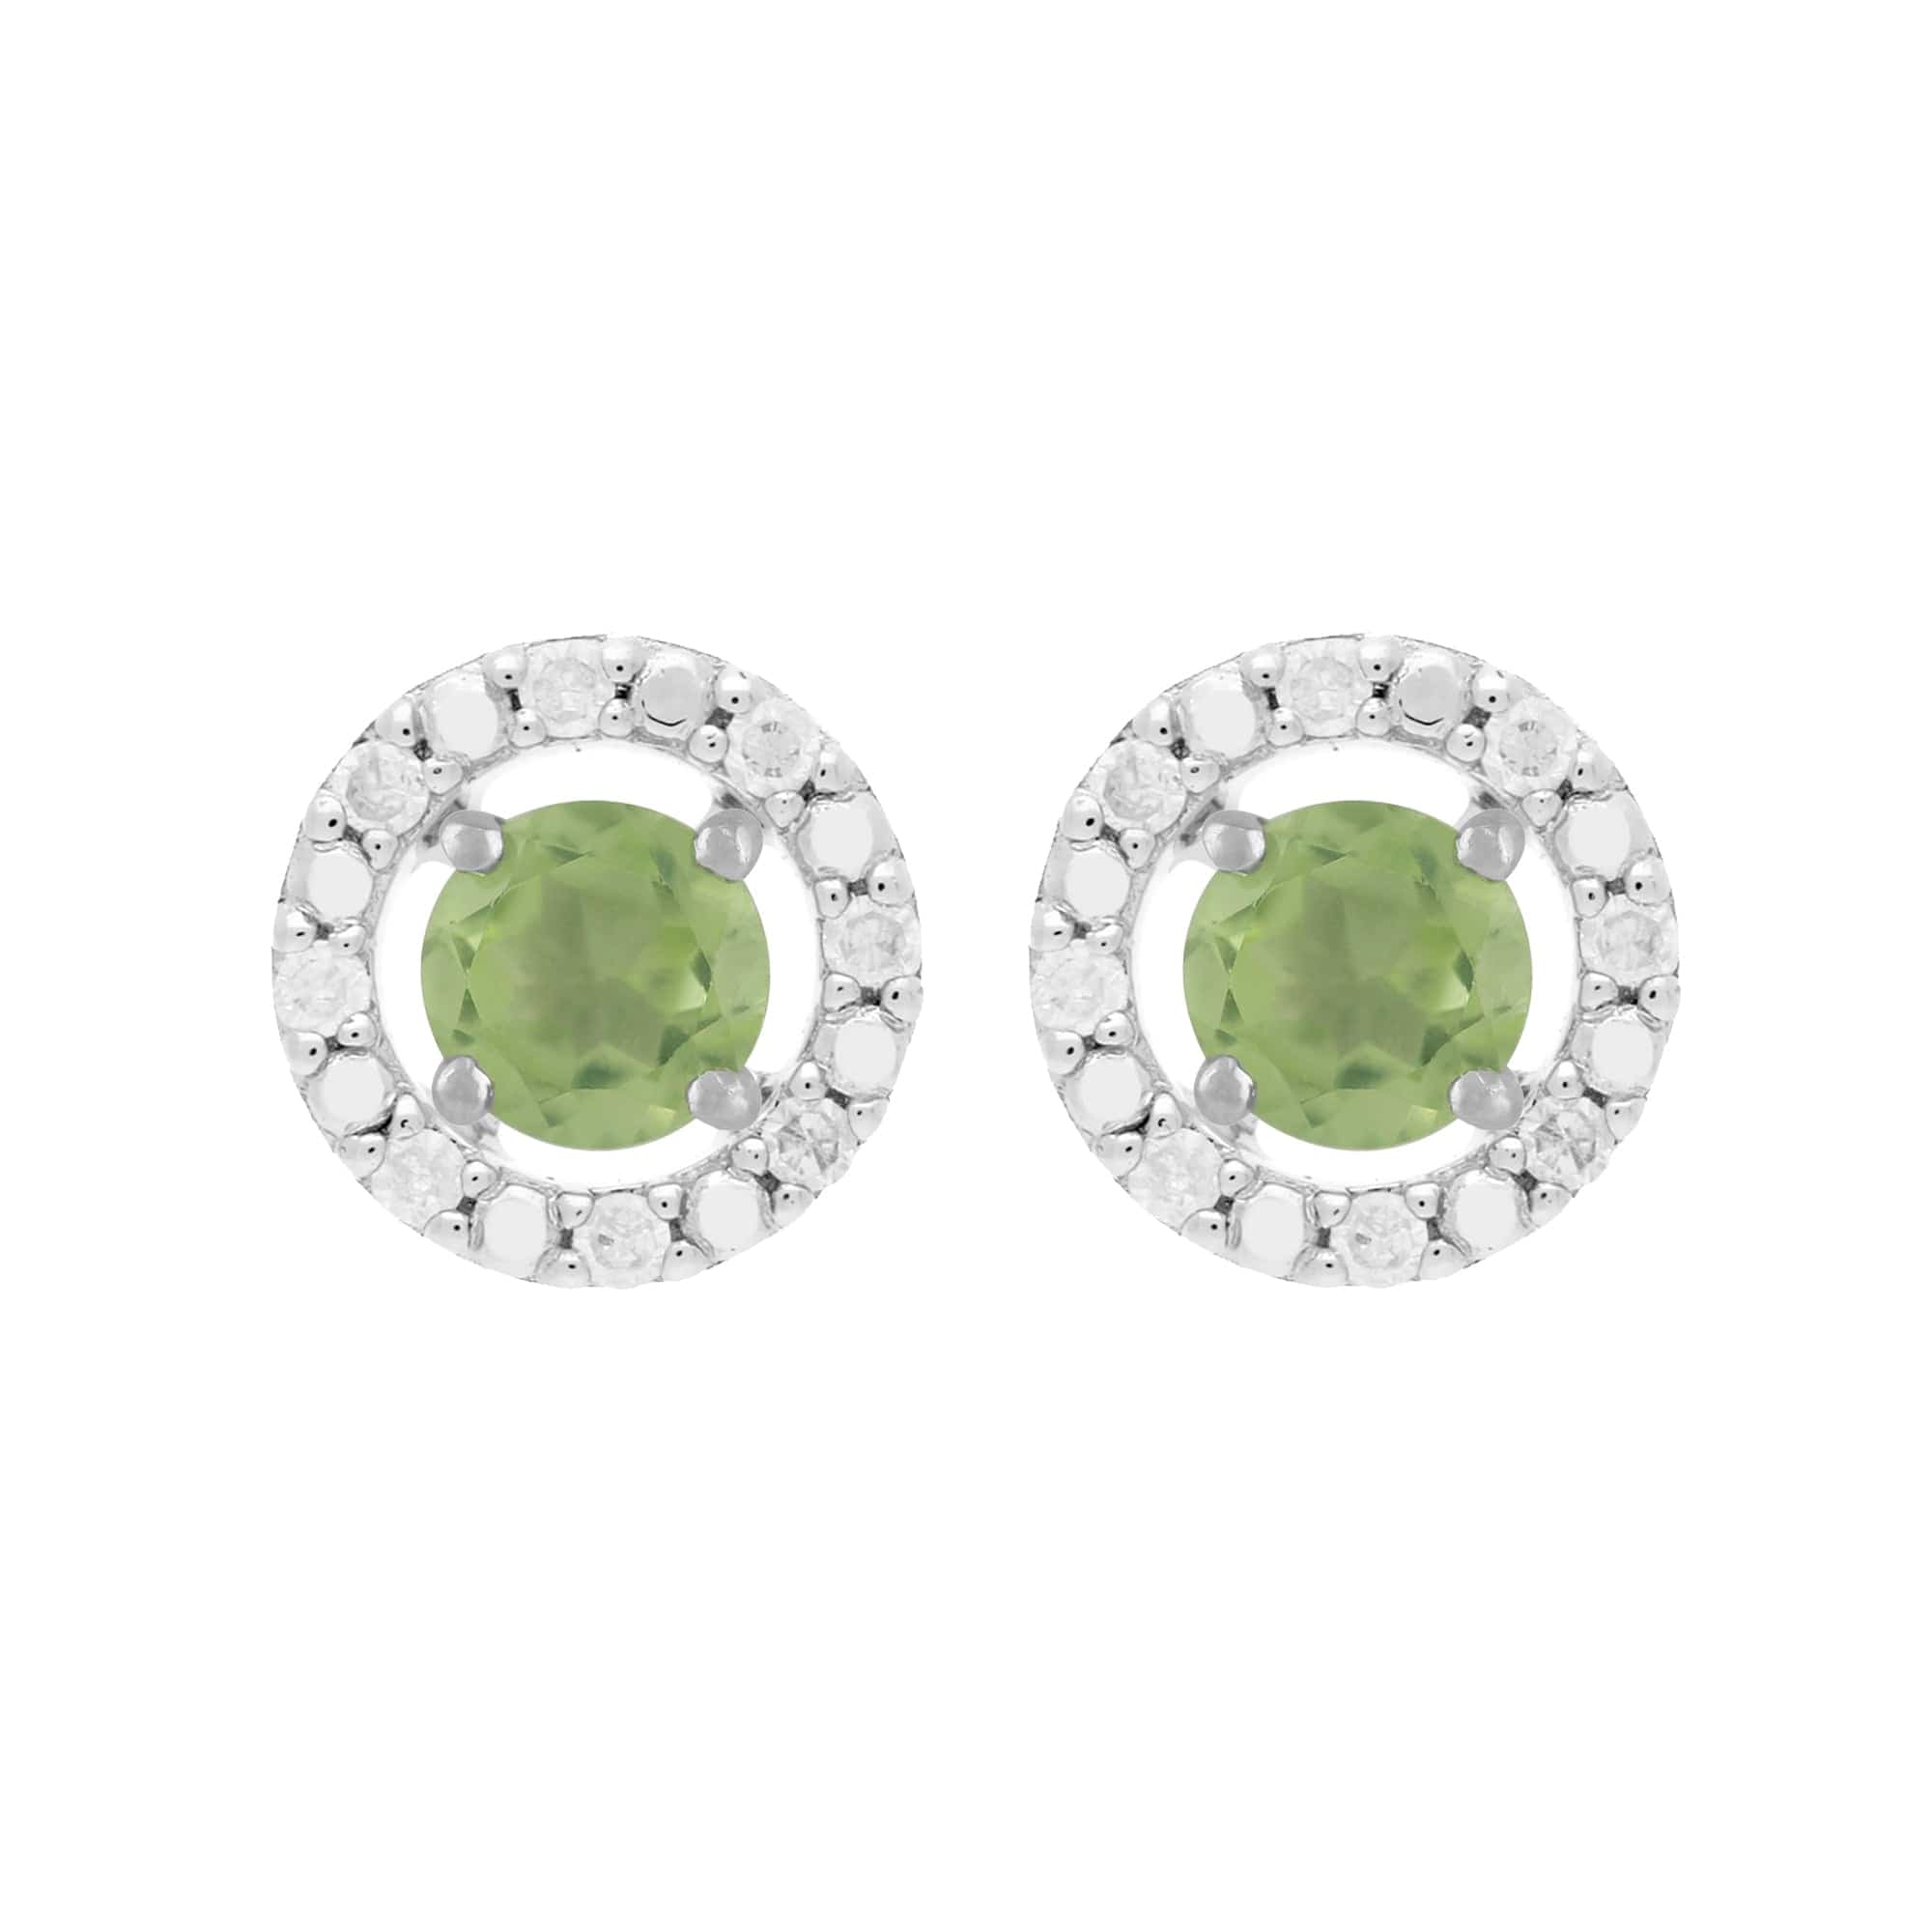 11614-162E0228019 Classic Round Peridot Stud Earrings with Detachable Diamond Round Ear Jacket in 9ct White Gold 1